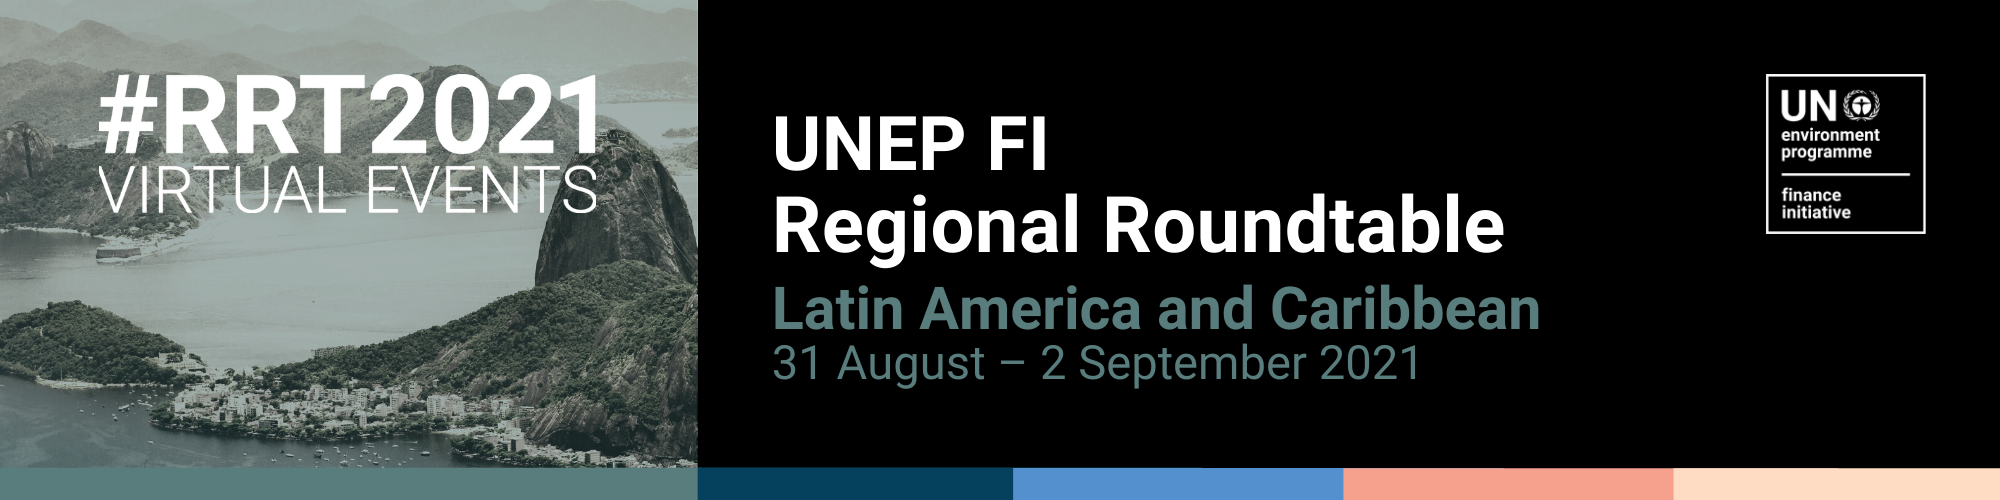 Reporter forfriskende Ansøger Regional Roundtable Latin America and Caribbean 2021 – United Nations  Environment – Finance Initiative